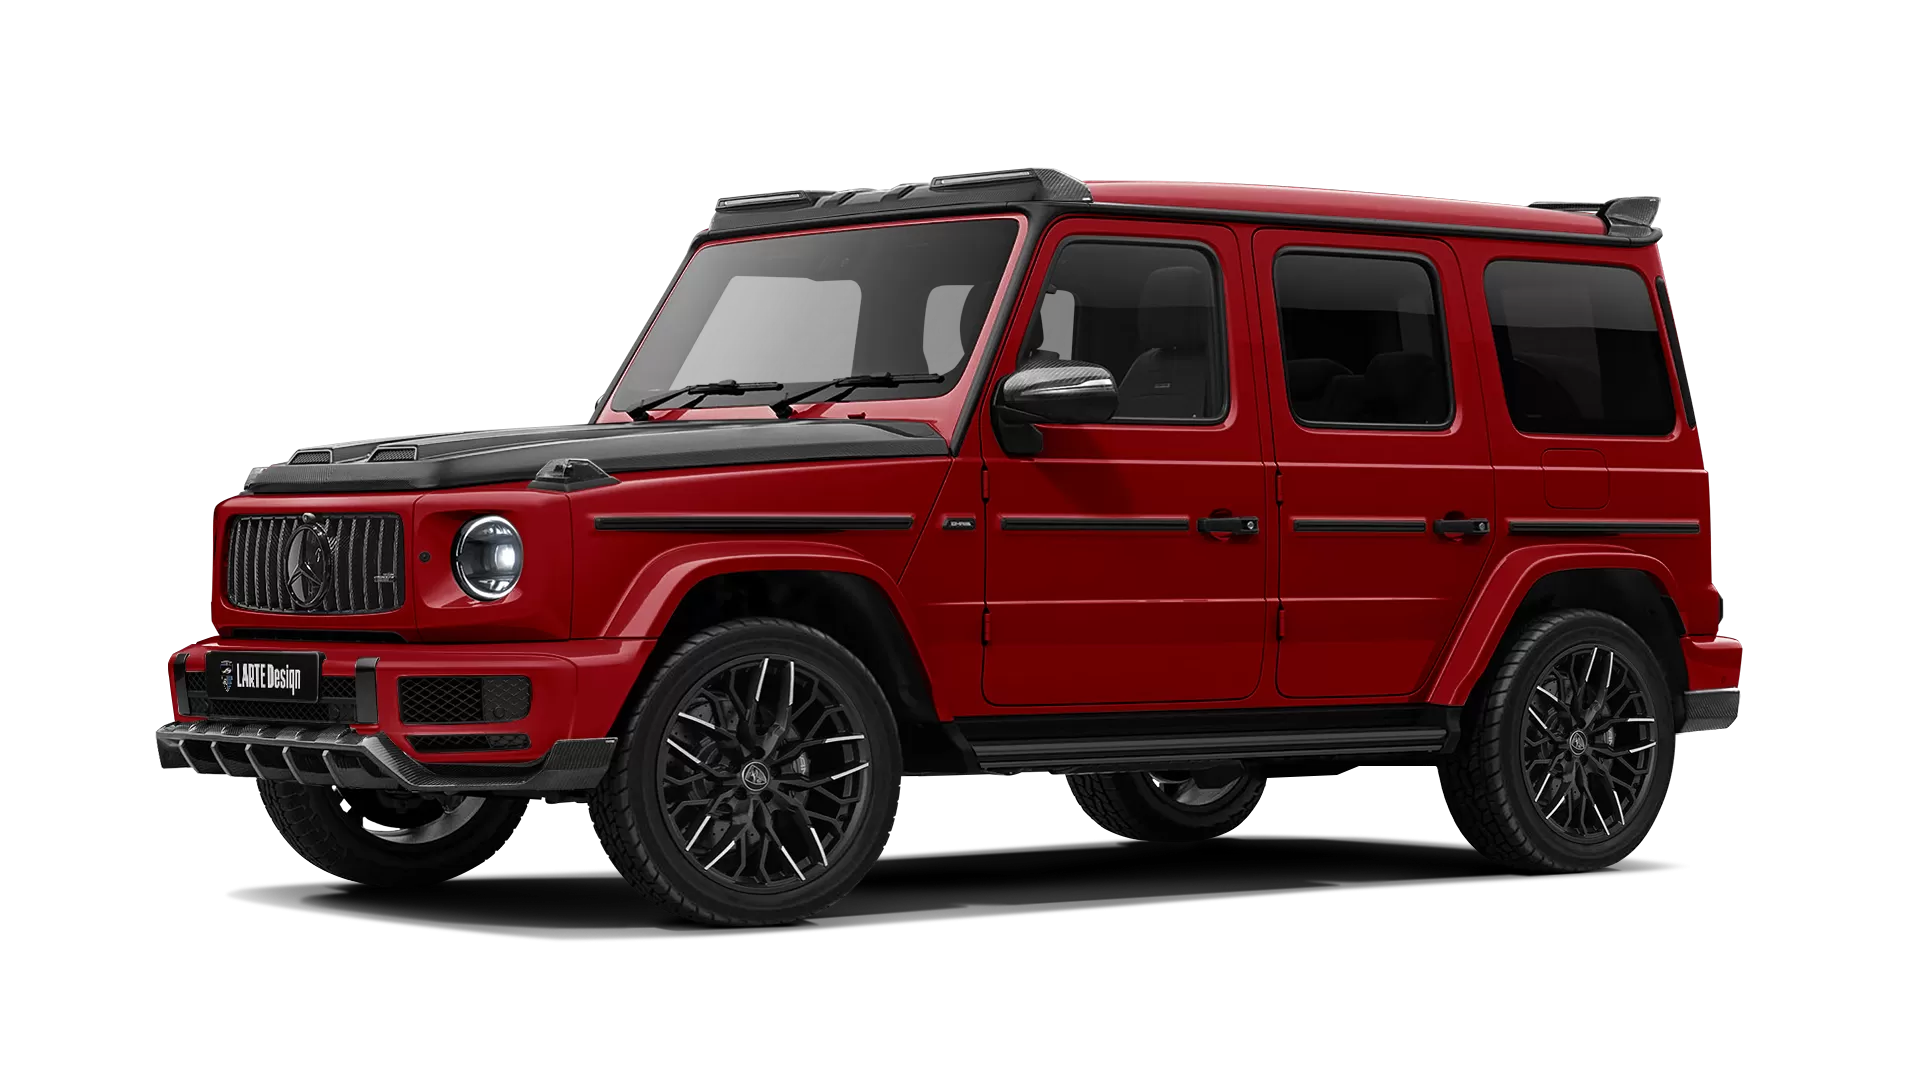 Mercedes G class W463 with carbon body kit: front view shown in Jupiter Red